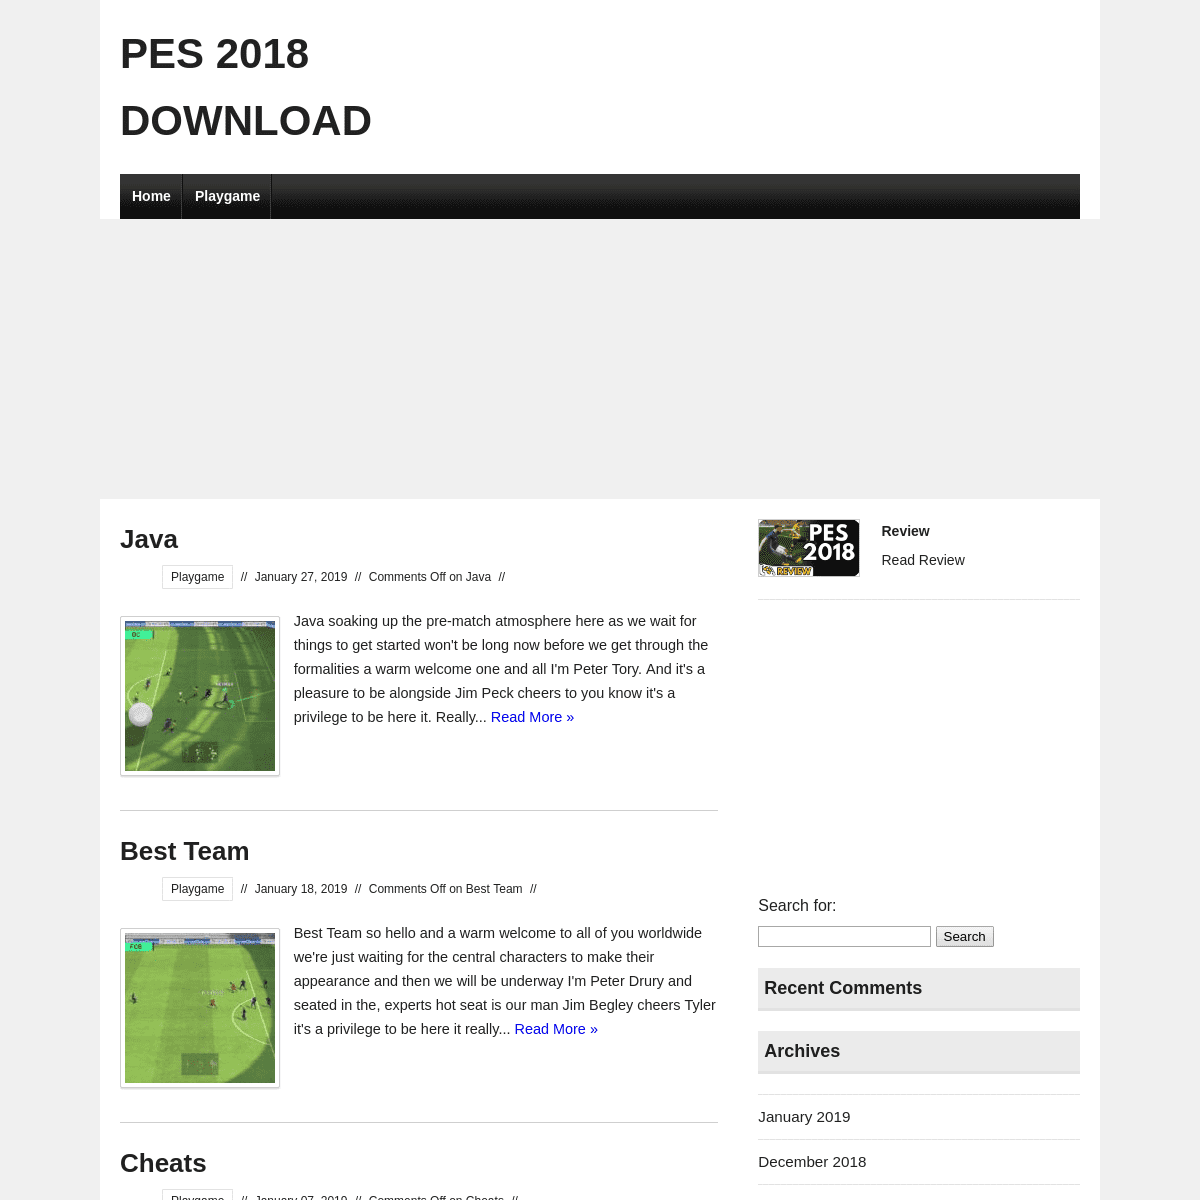 A complete backup of pes2018.download